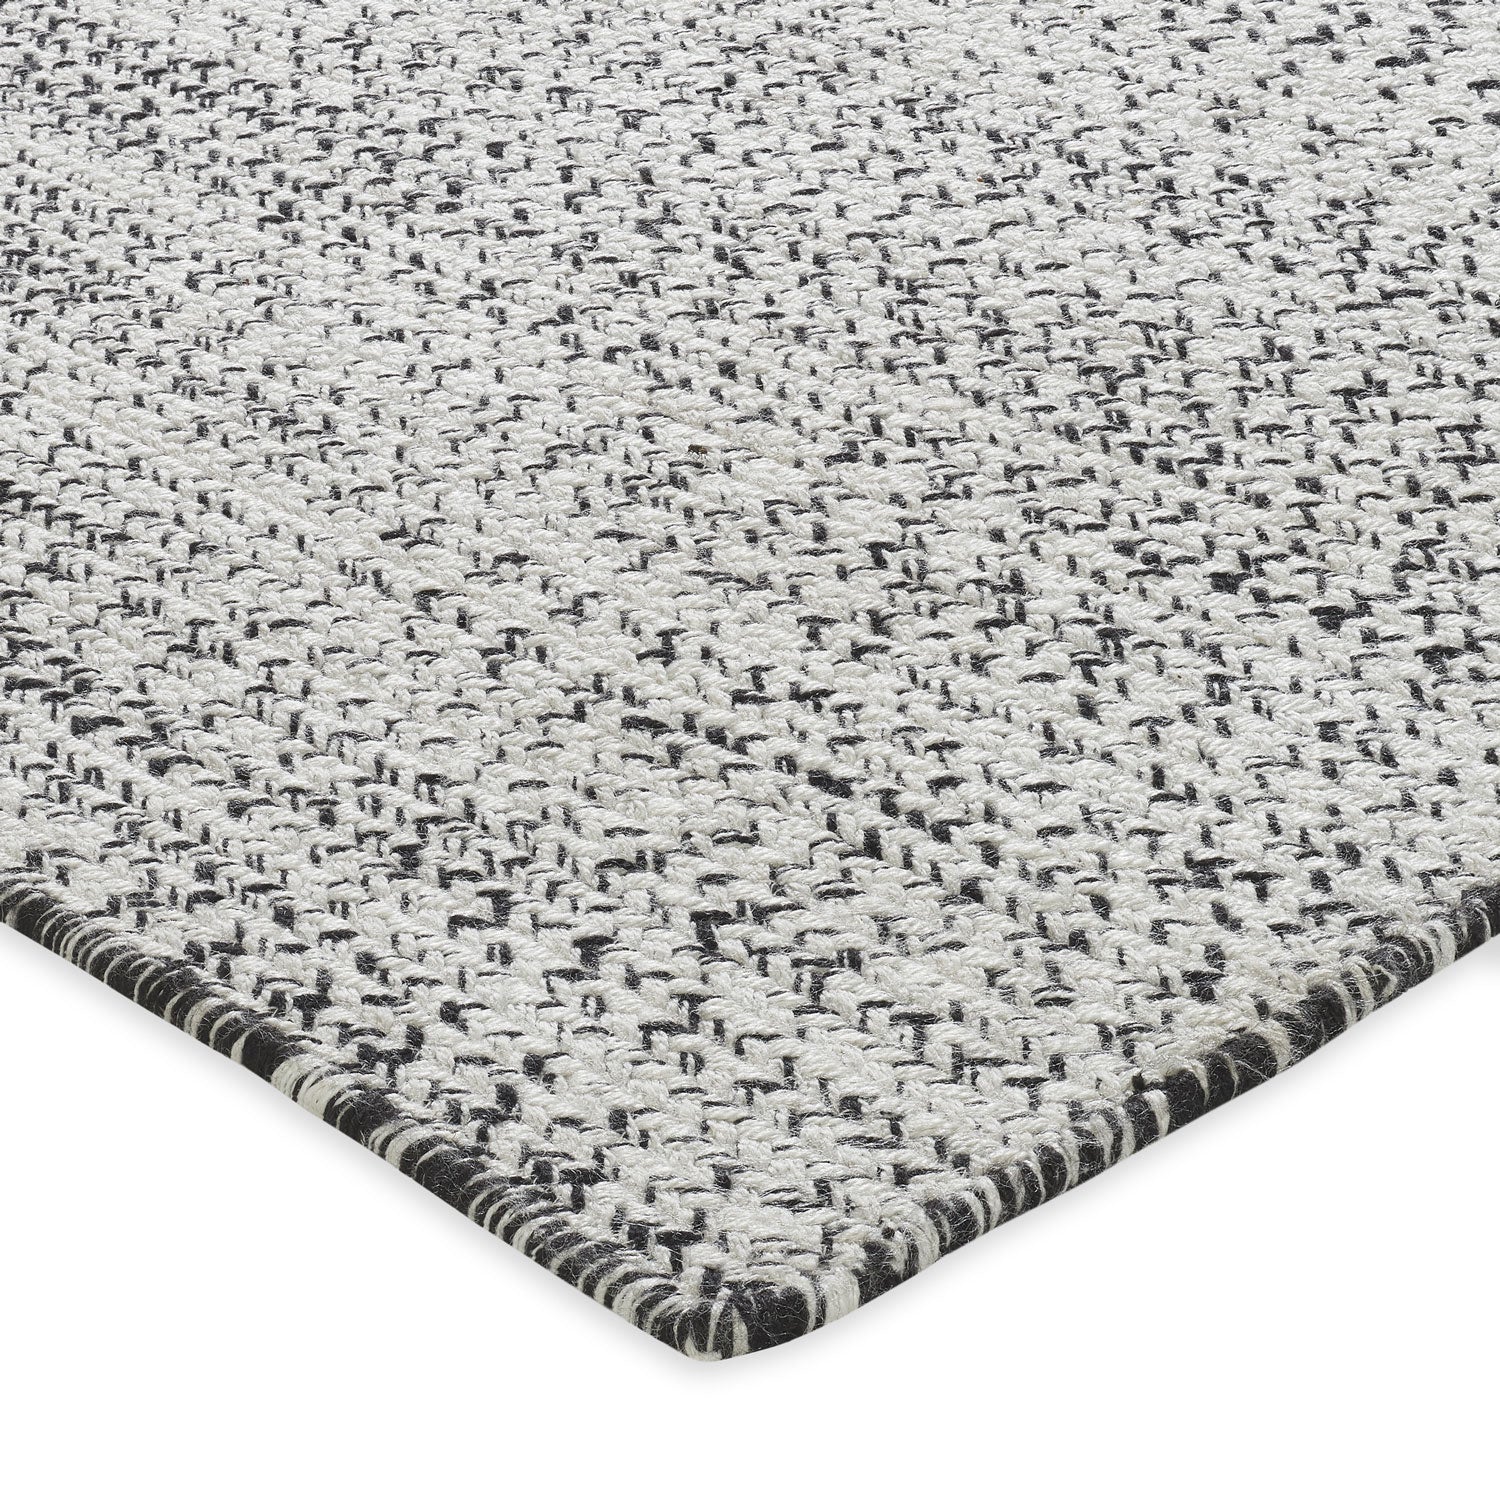 Almafi Carpet- (Test Product- do not purchase!)